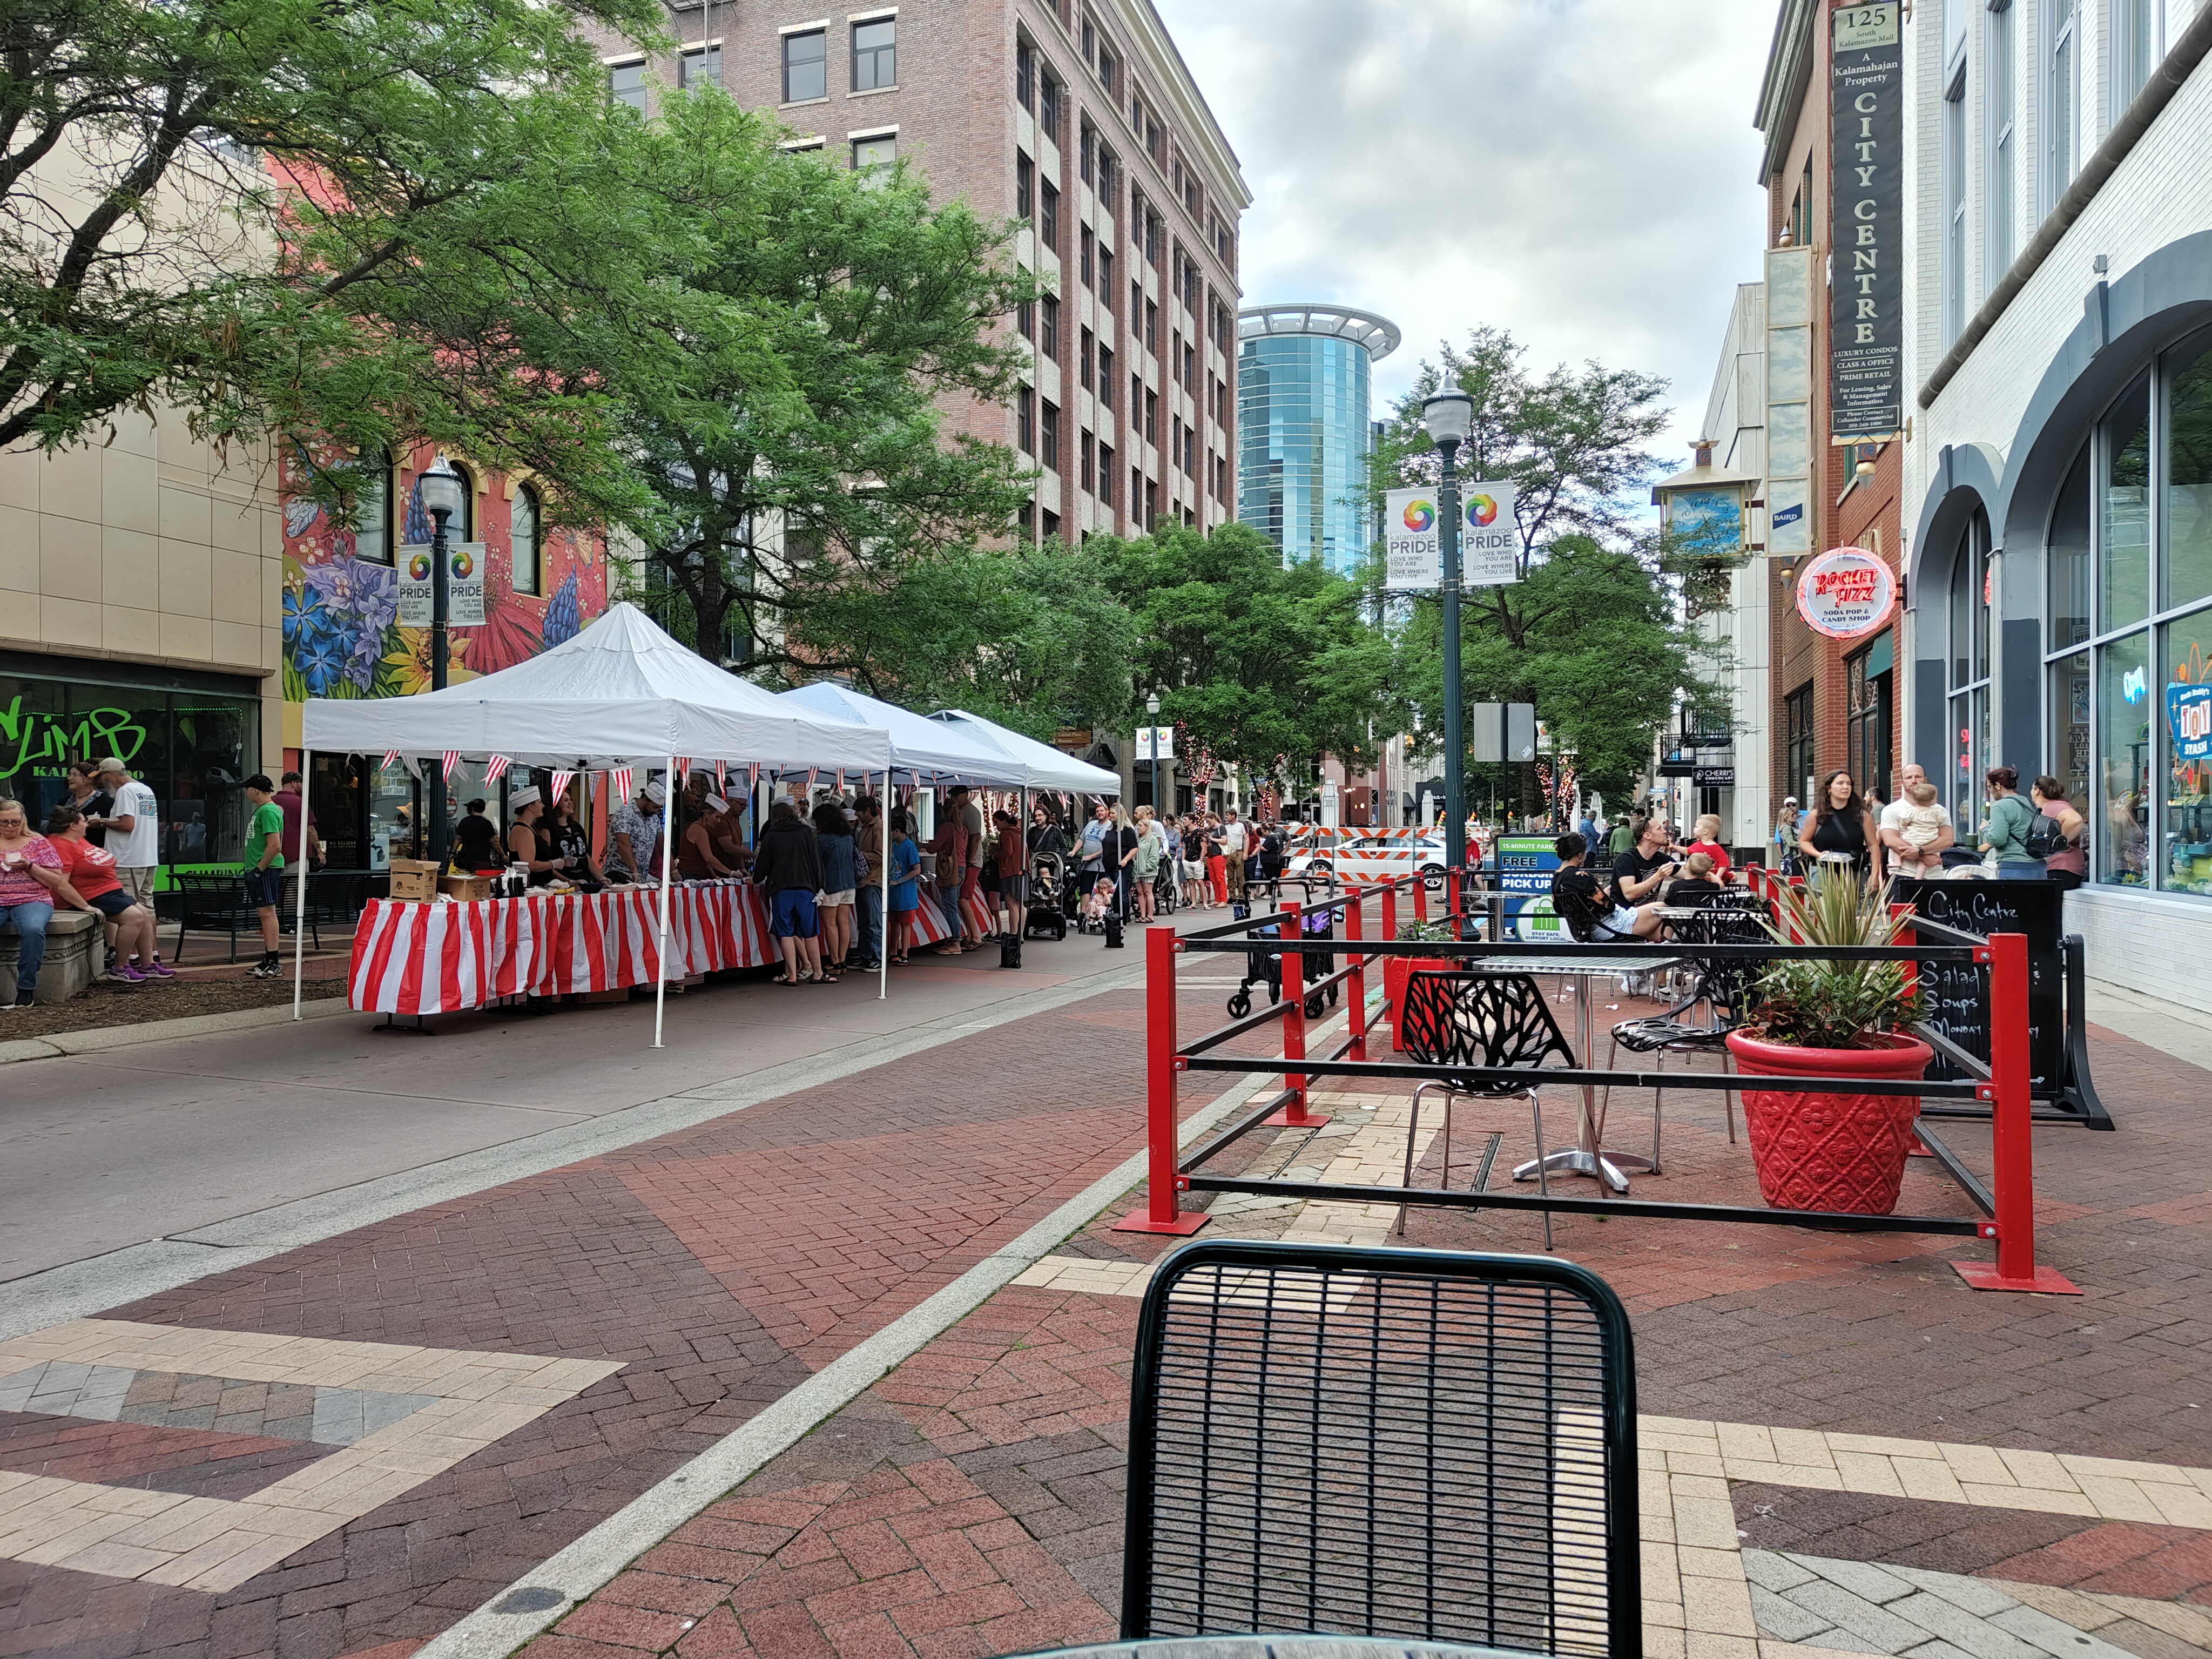 Photo of an ice cream social in downtown Kalamazoo, taken with the Nothing Phone 2.